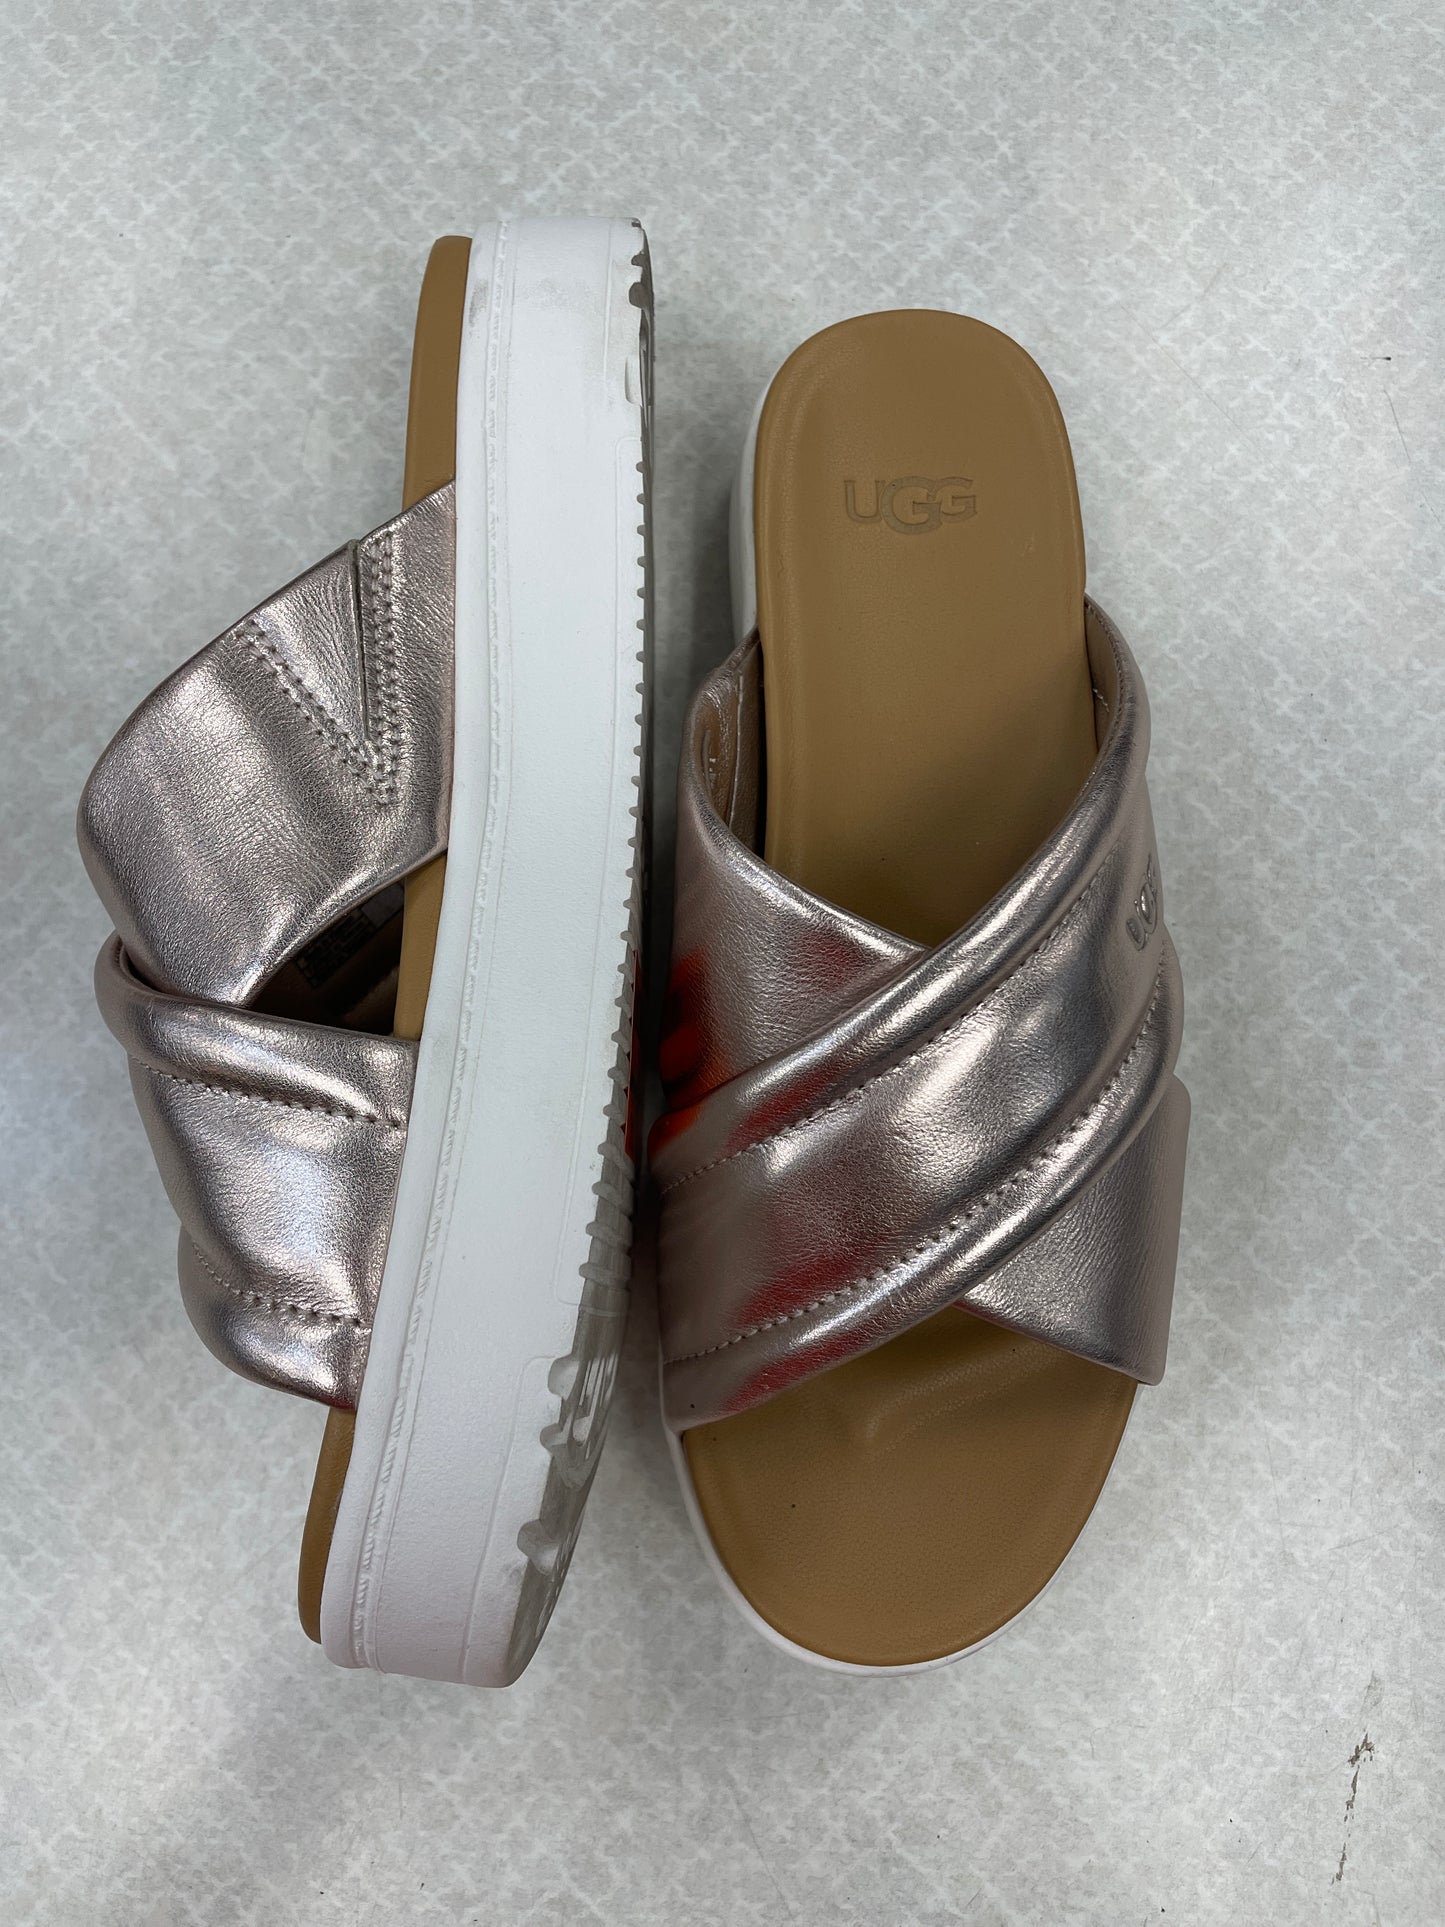 Shoes Flats Mule & Slide By Ugg  Size: 6.5